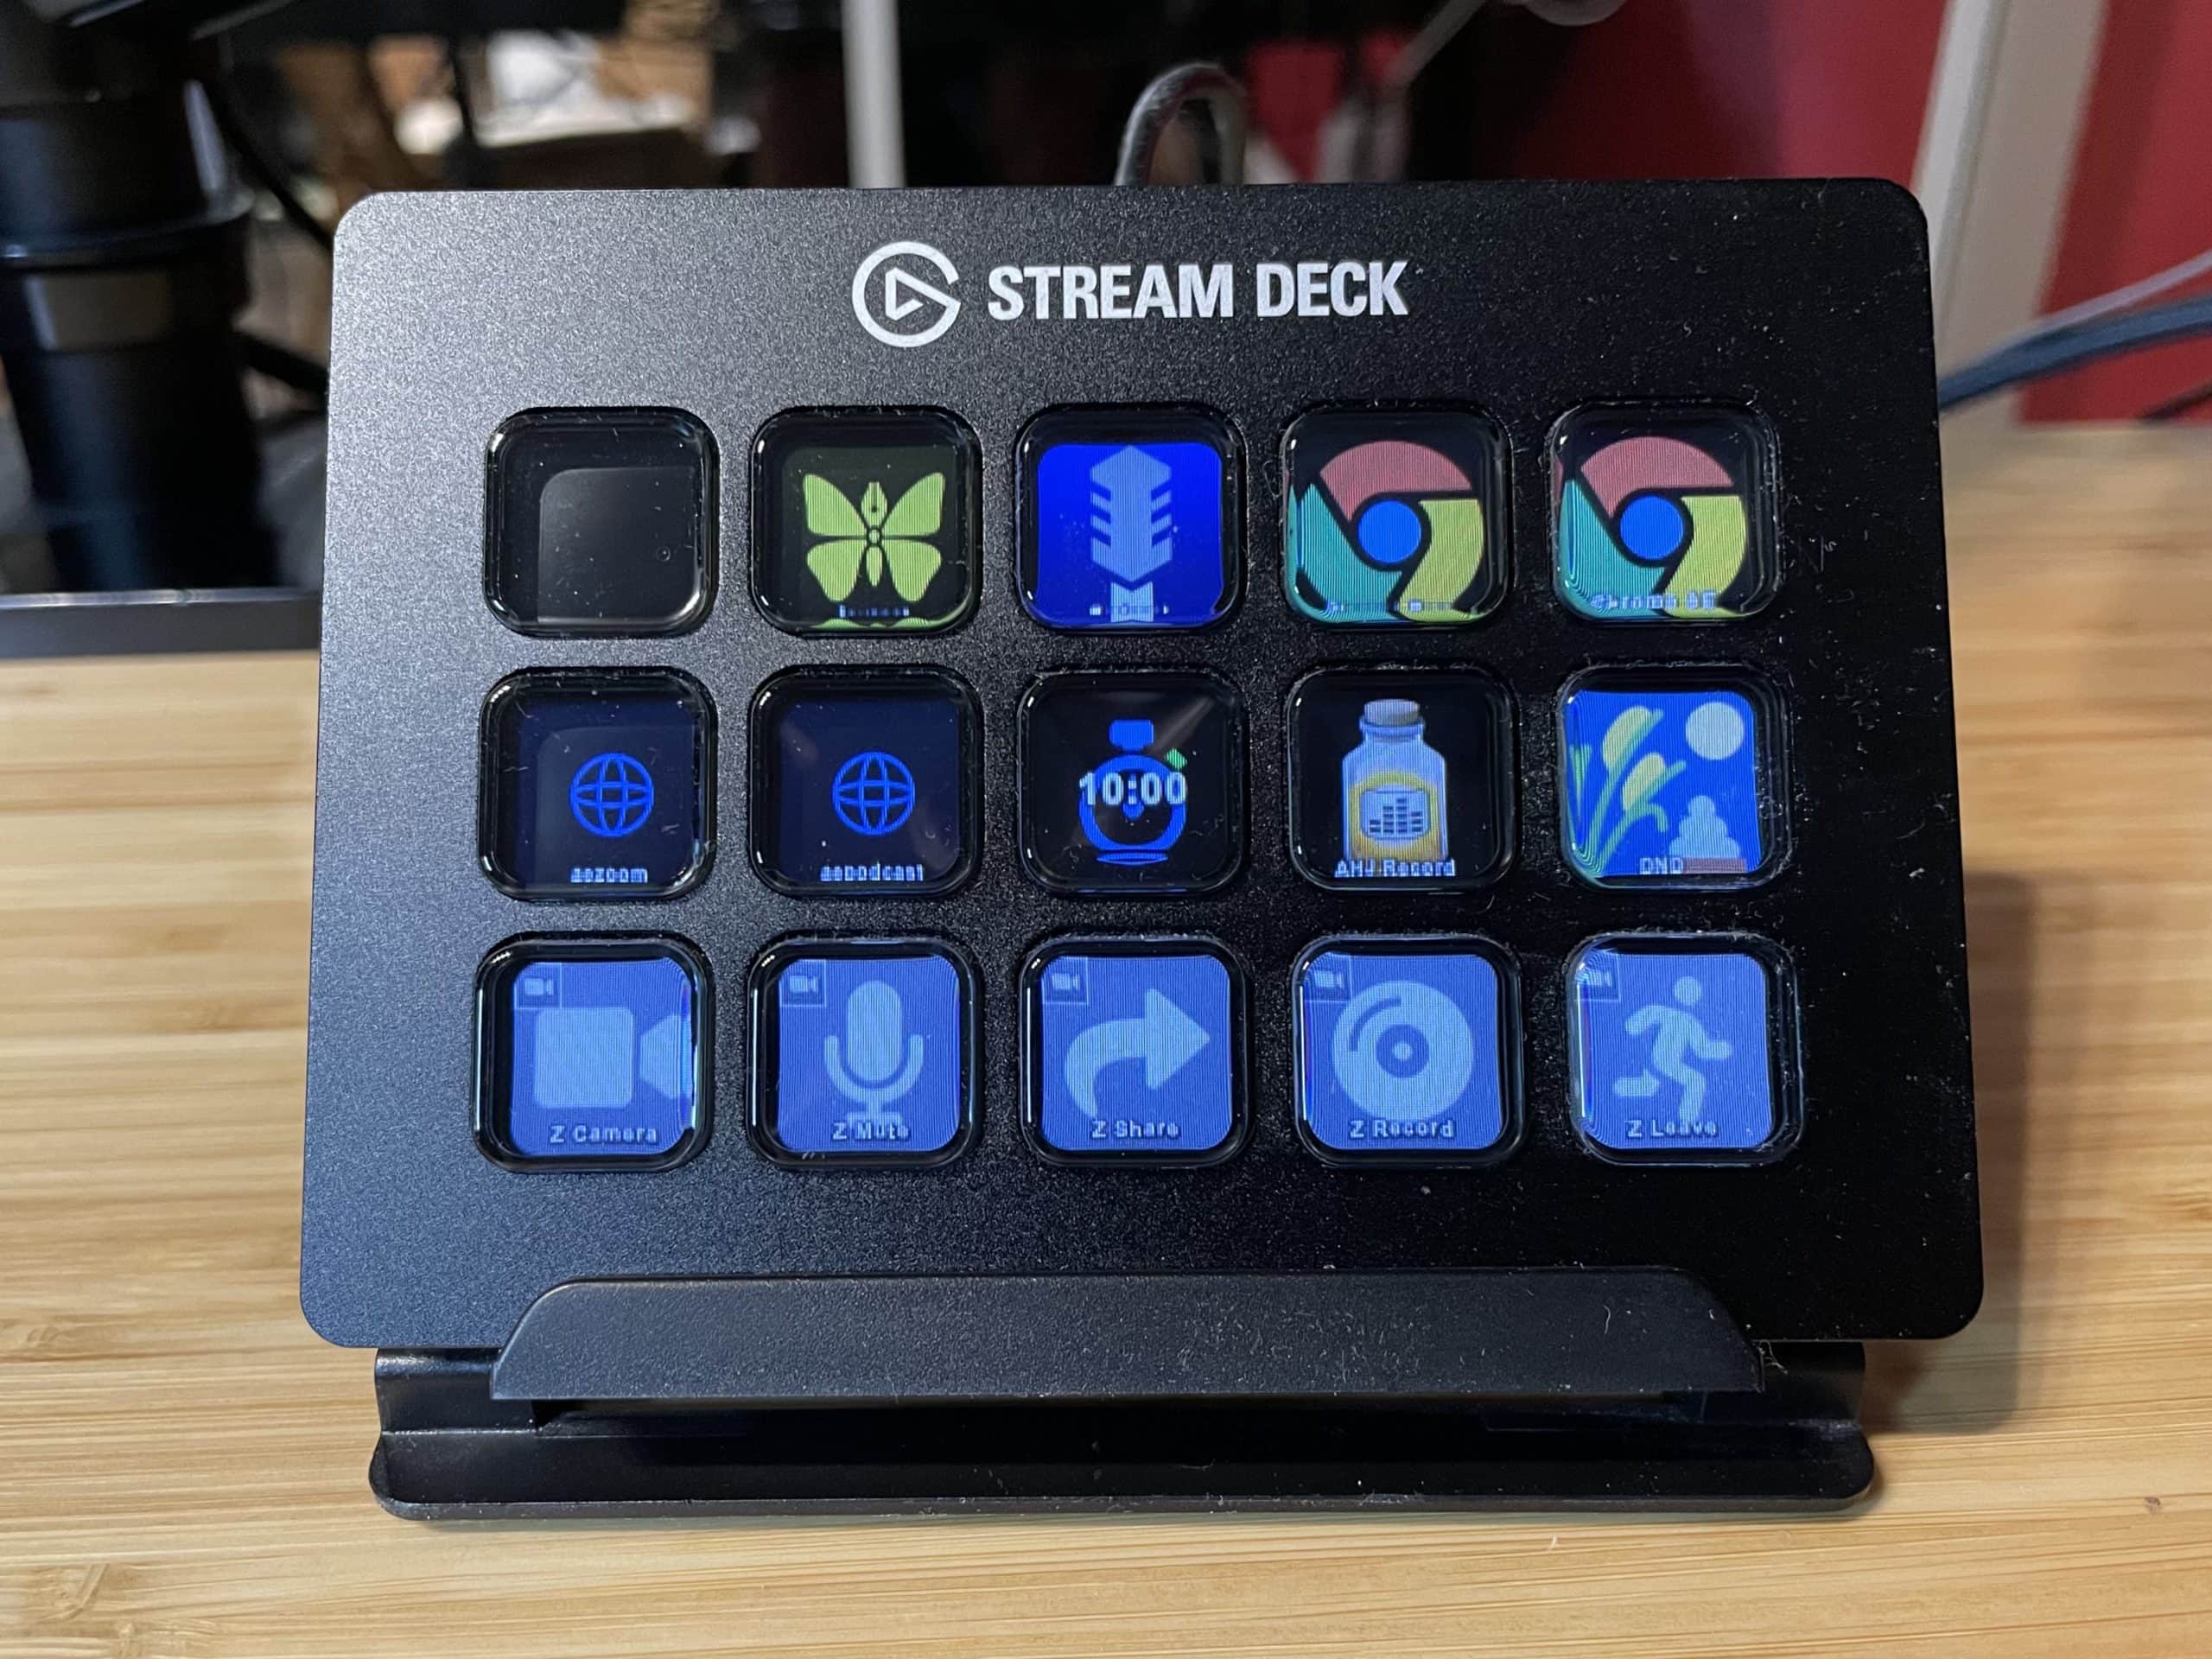 EXCEL 365 OFFICE, STREAM DECK ICONS